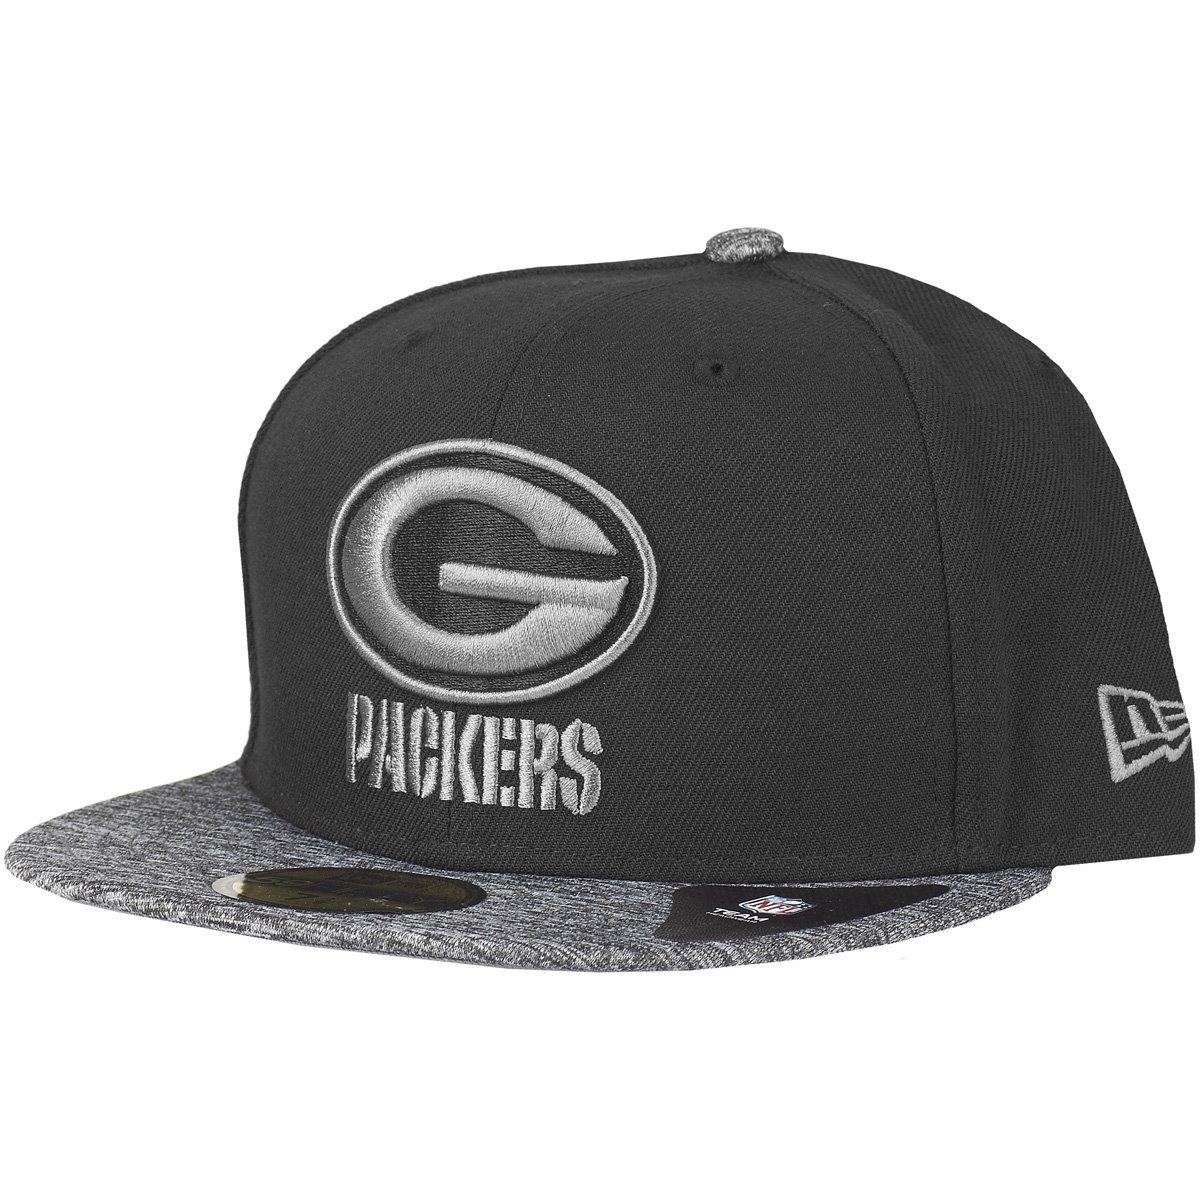 Green New II Fitted GREY 59Fifty Cap Packers Era Bay